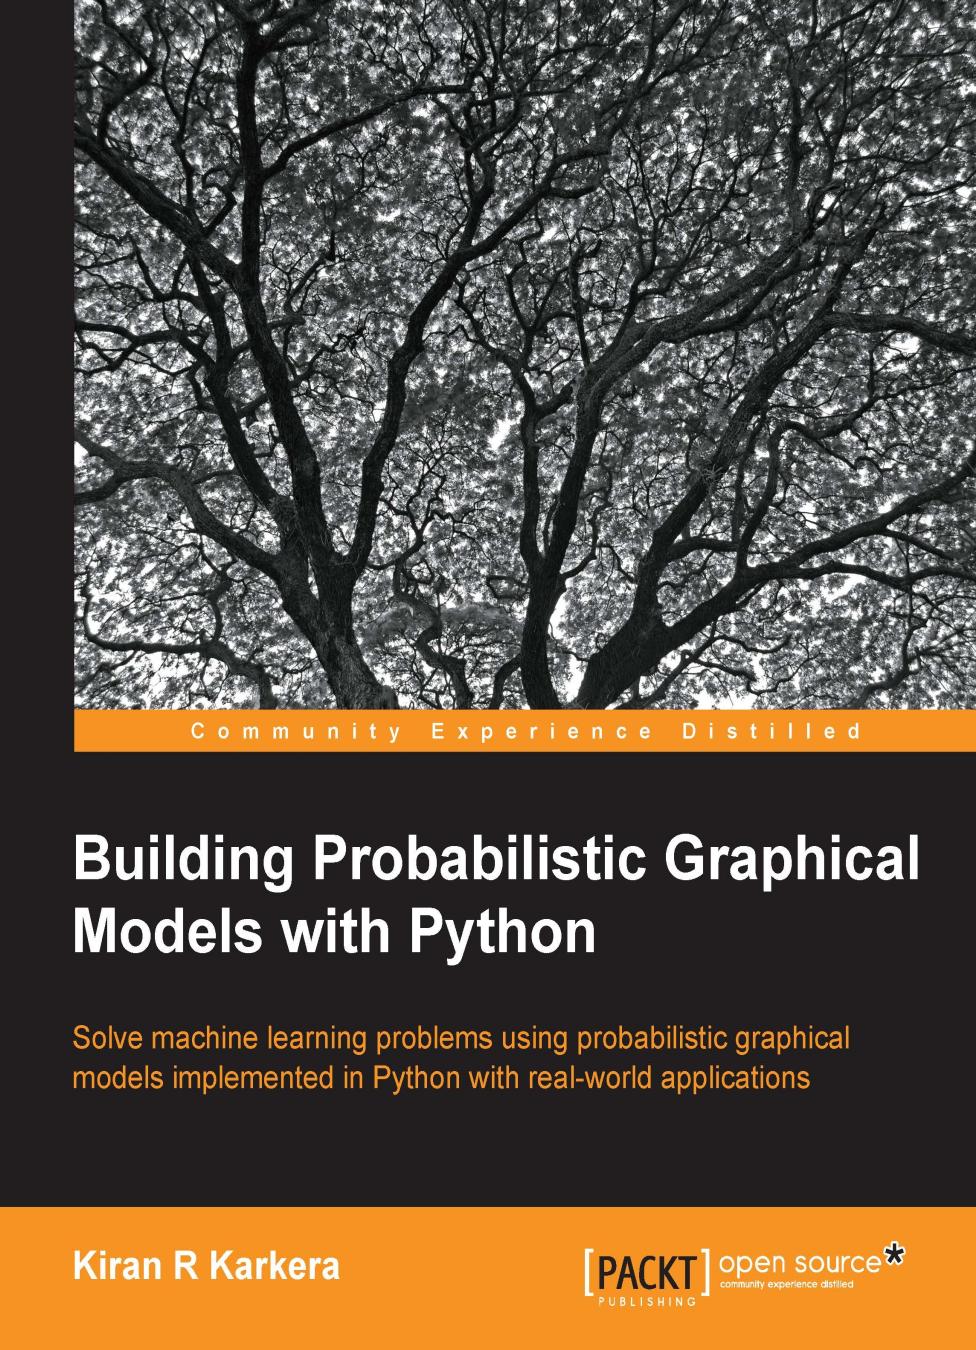 Building Probabilistic Graphical Models with Python by Kiran R Karkera